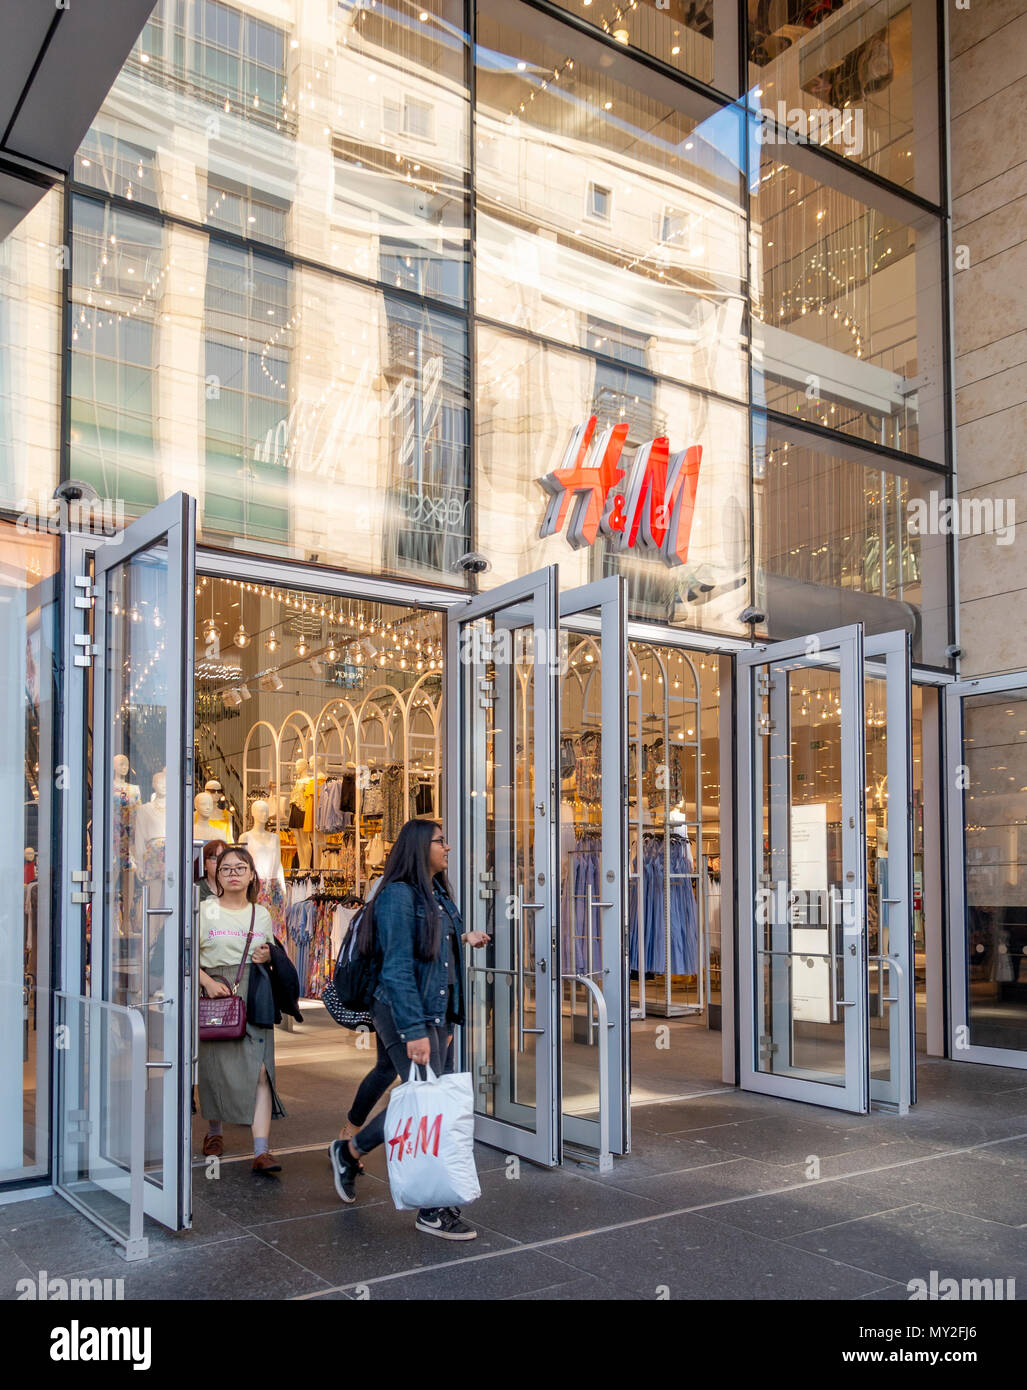 Customers leaving the H&M fashion store in Buchanan Street, Glasgow. One is carrying an H&M carrier bag. Scotland, UK. Stock Photo